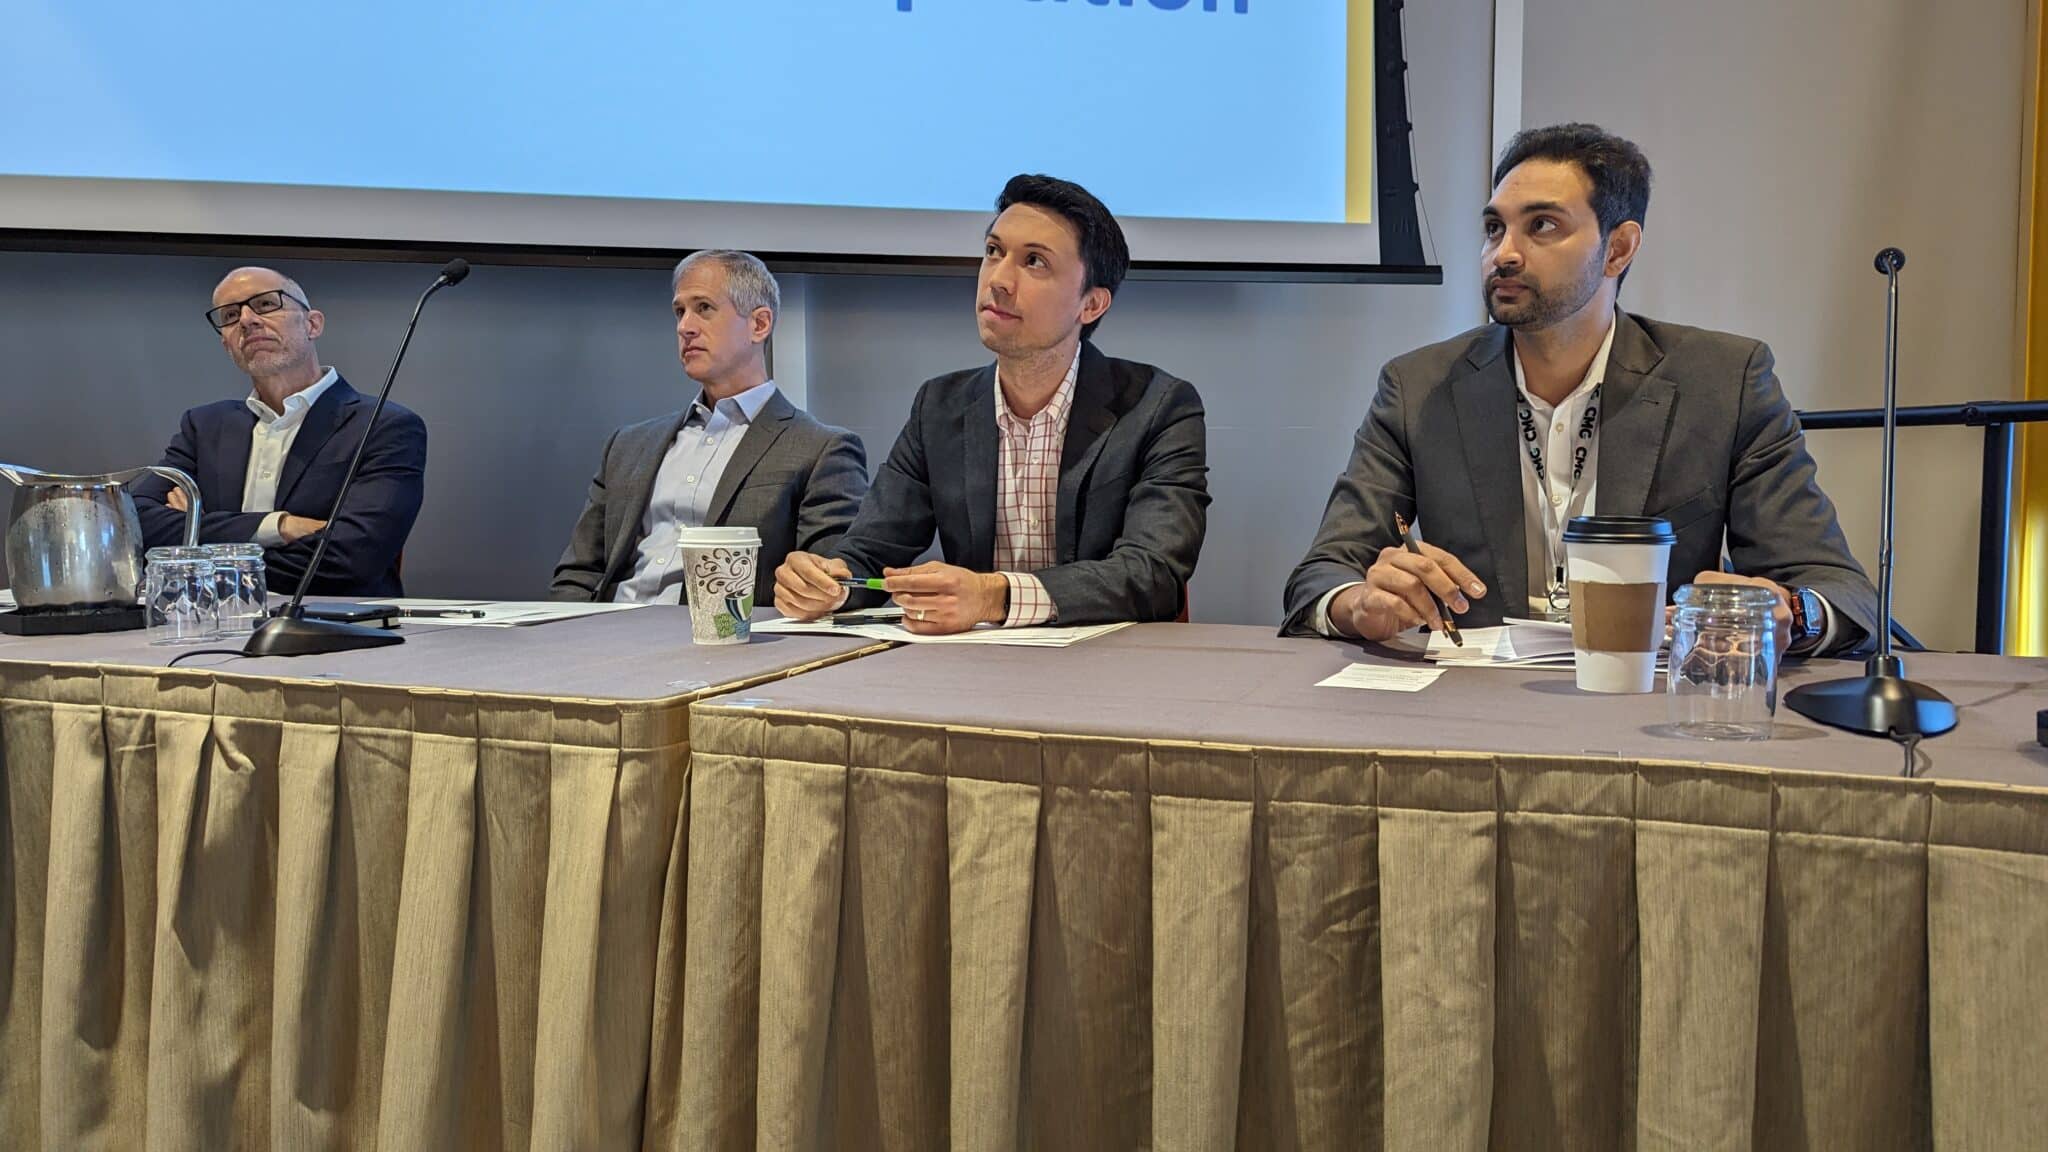 The ATCE startup judging panel listens as companies pitch investors. – Photo by ACCELERATE